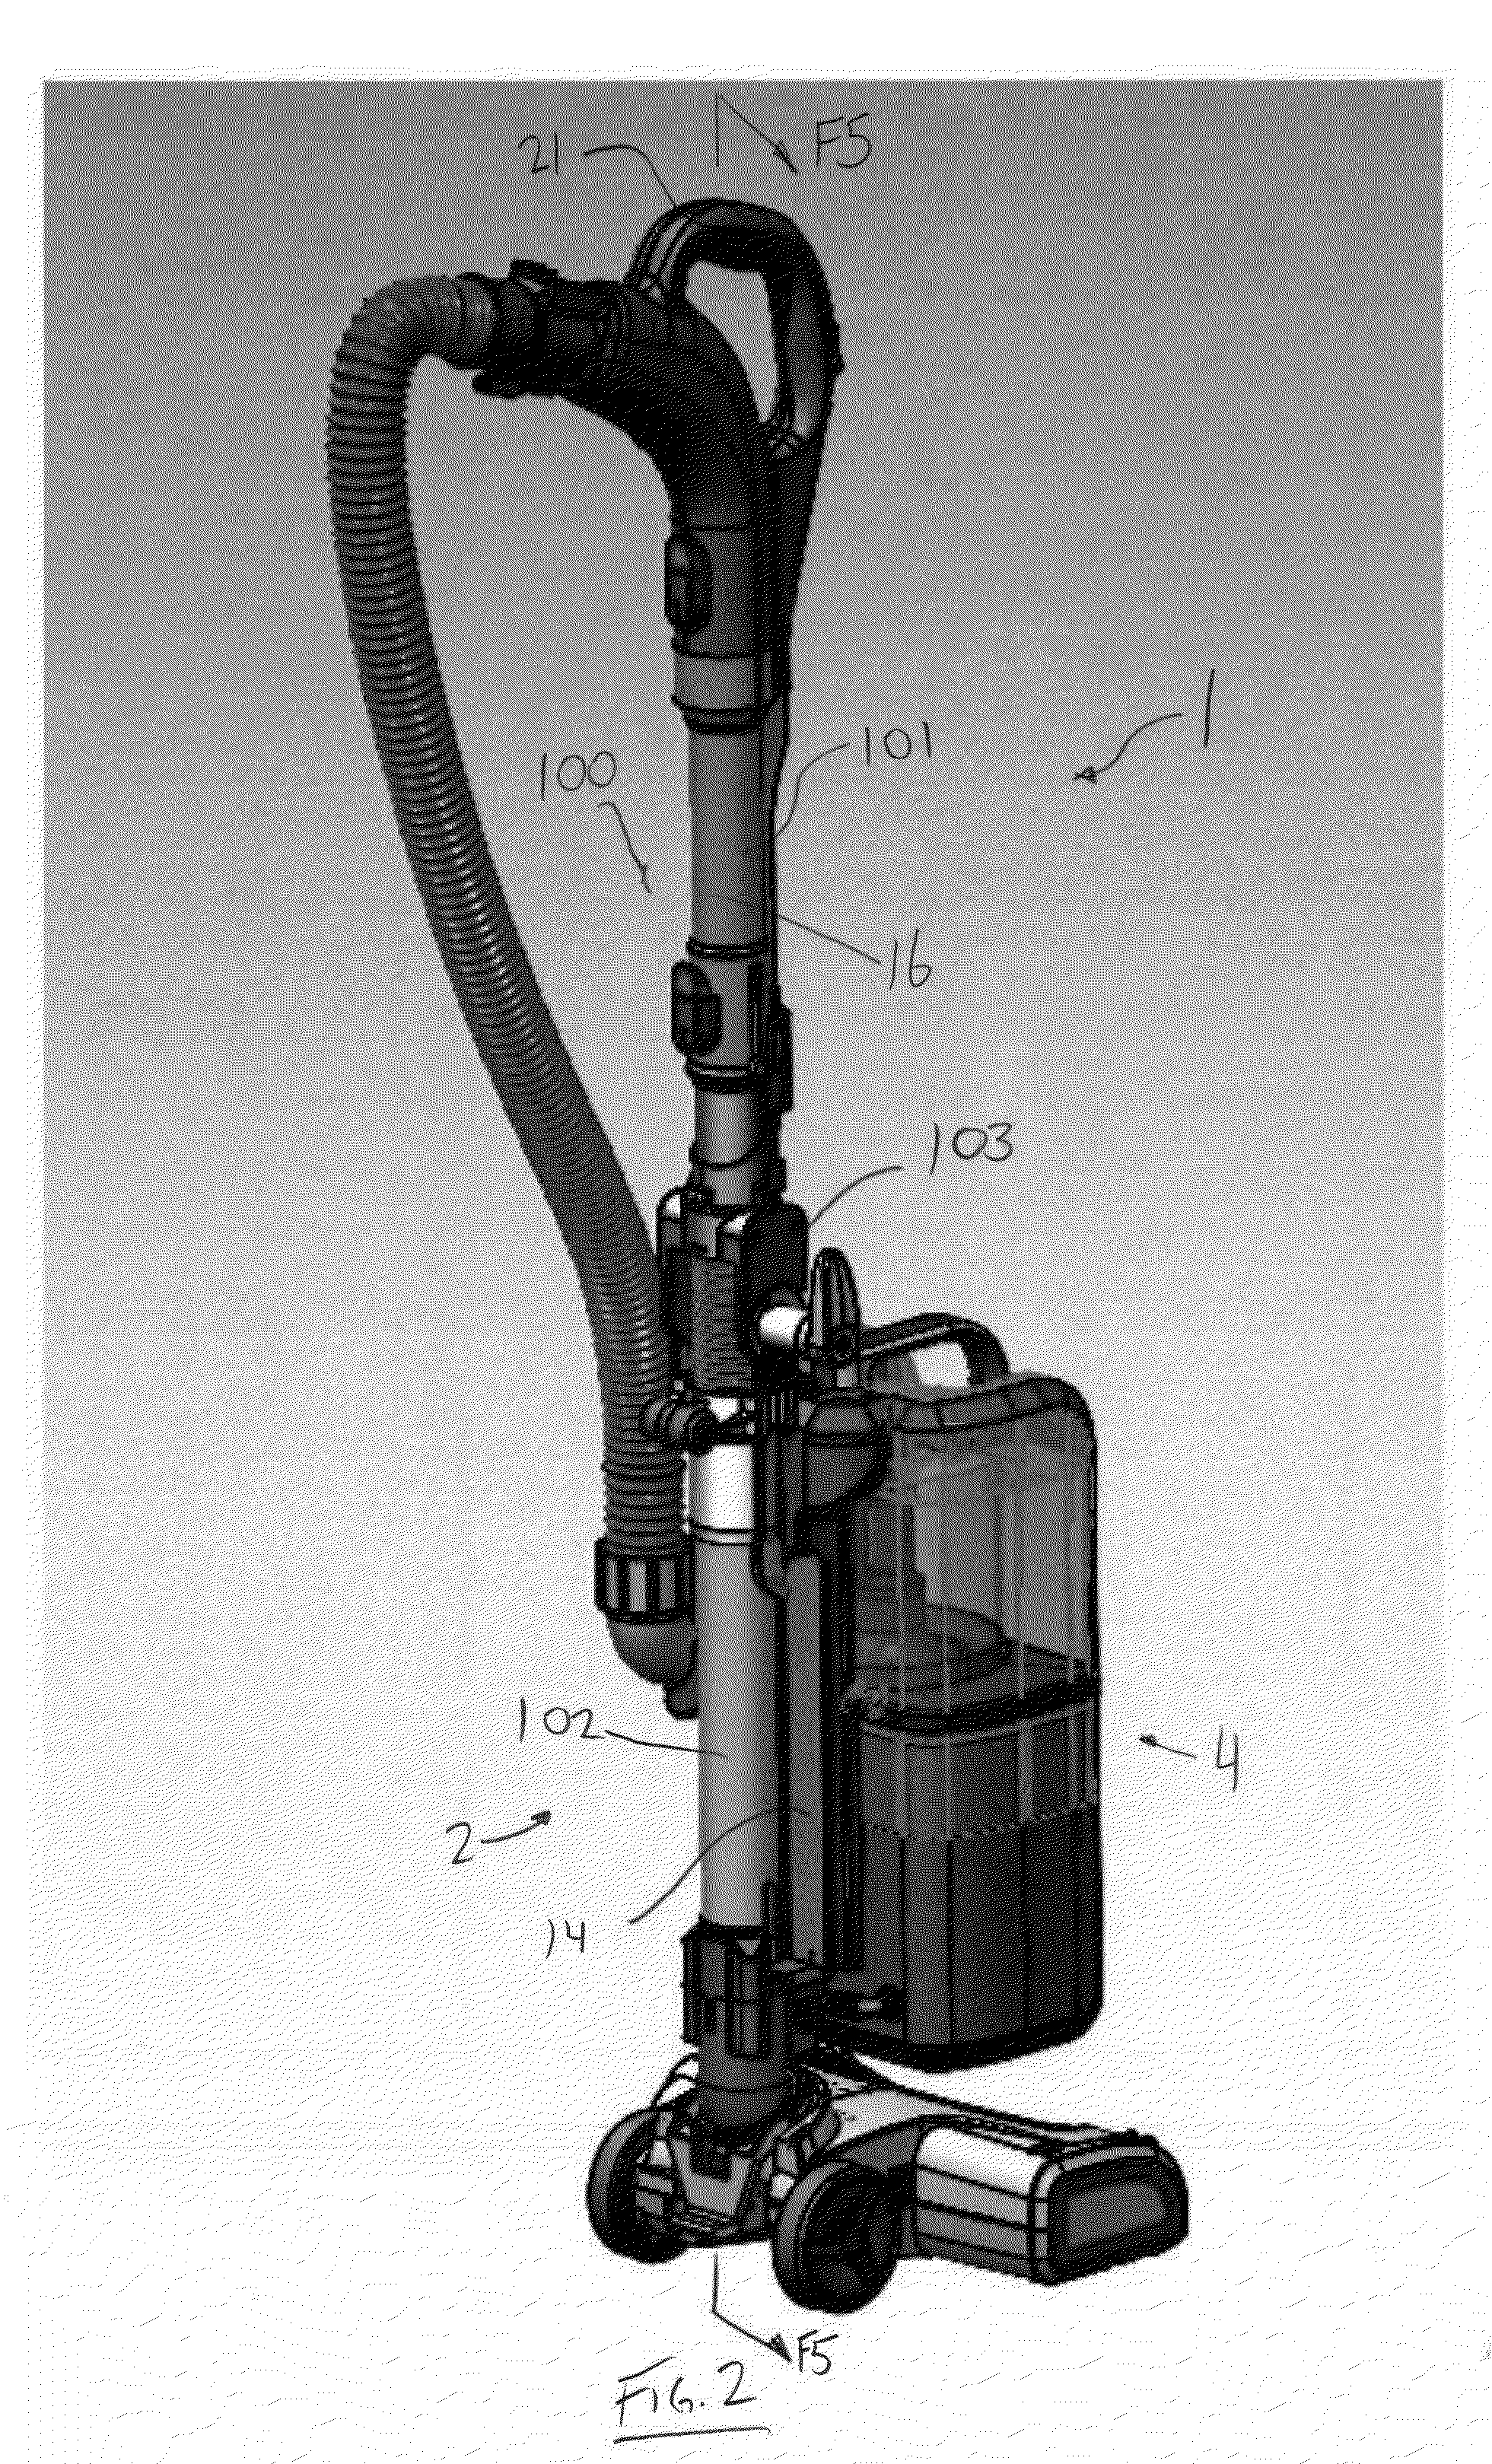 Cyclone such as for use in a surface cleaning apparatus